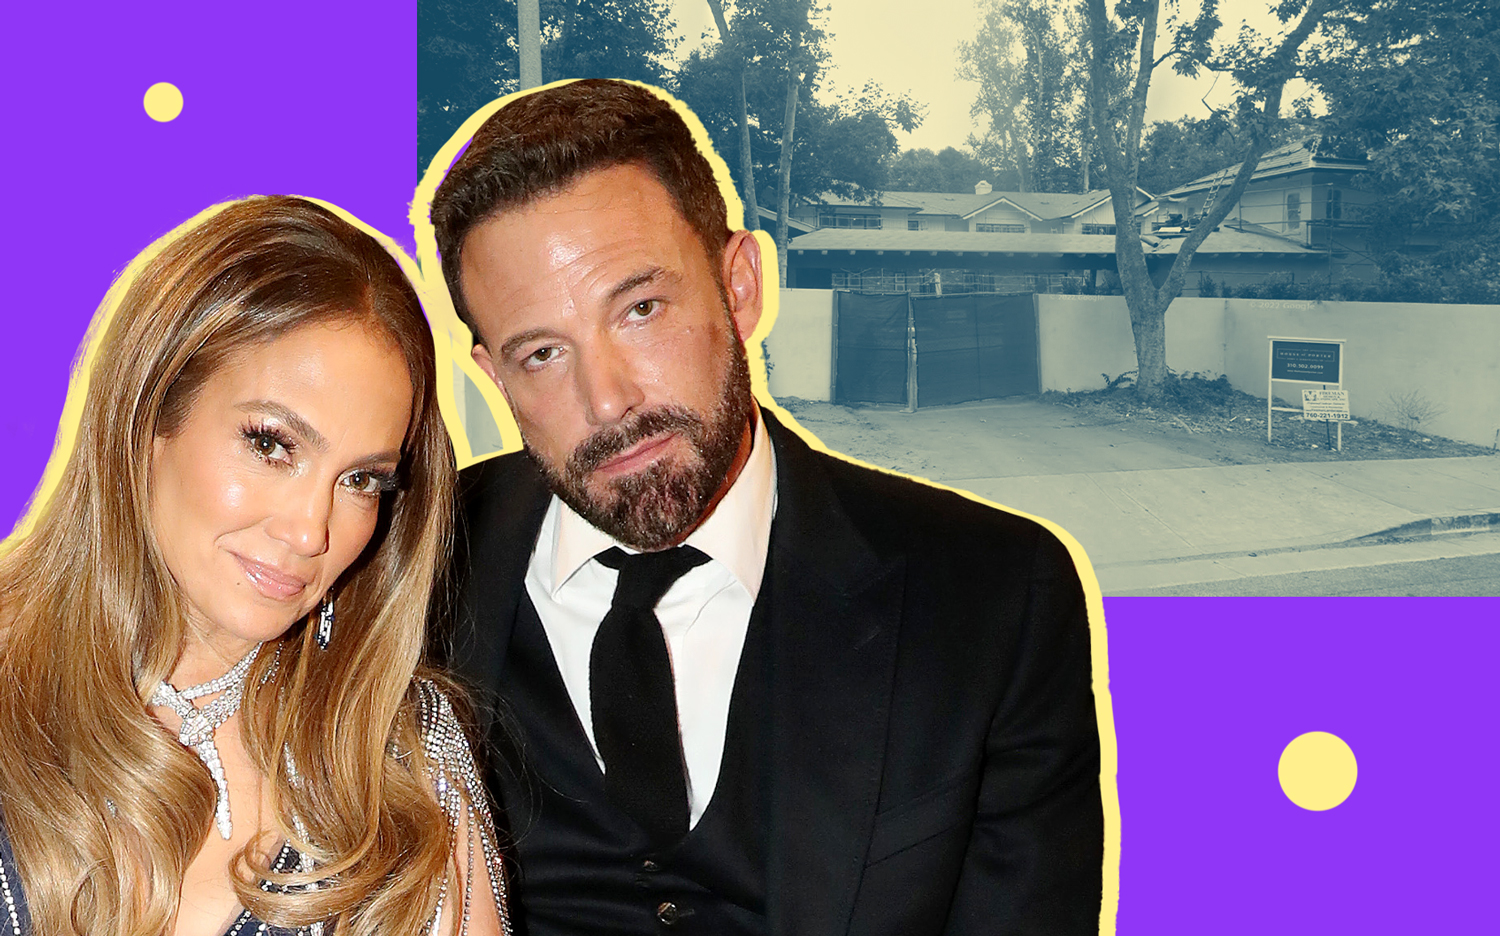 J.Lo and Ben Affleck in escrow on Pacific Palisades home that sought $35M